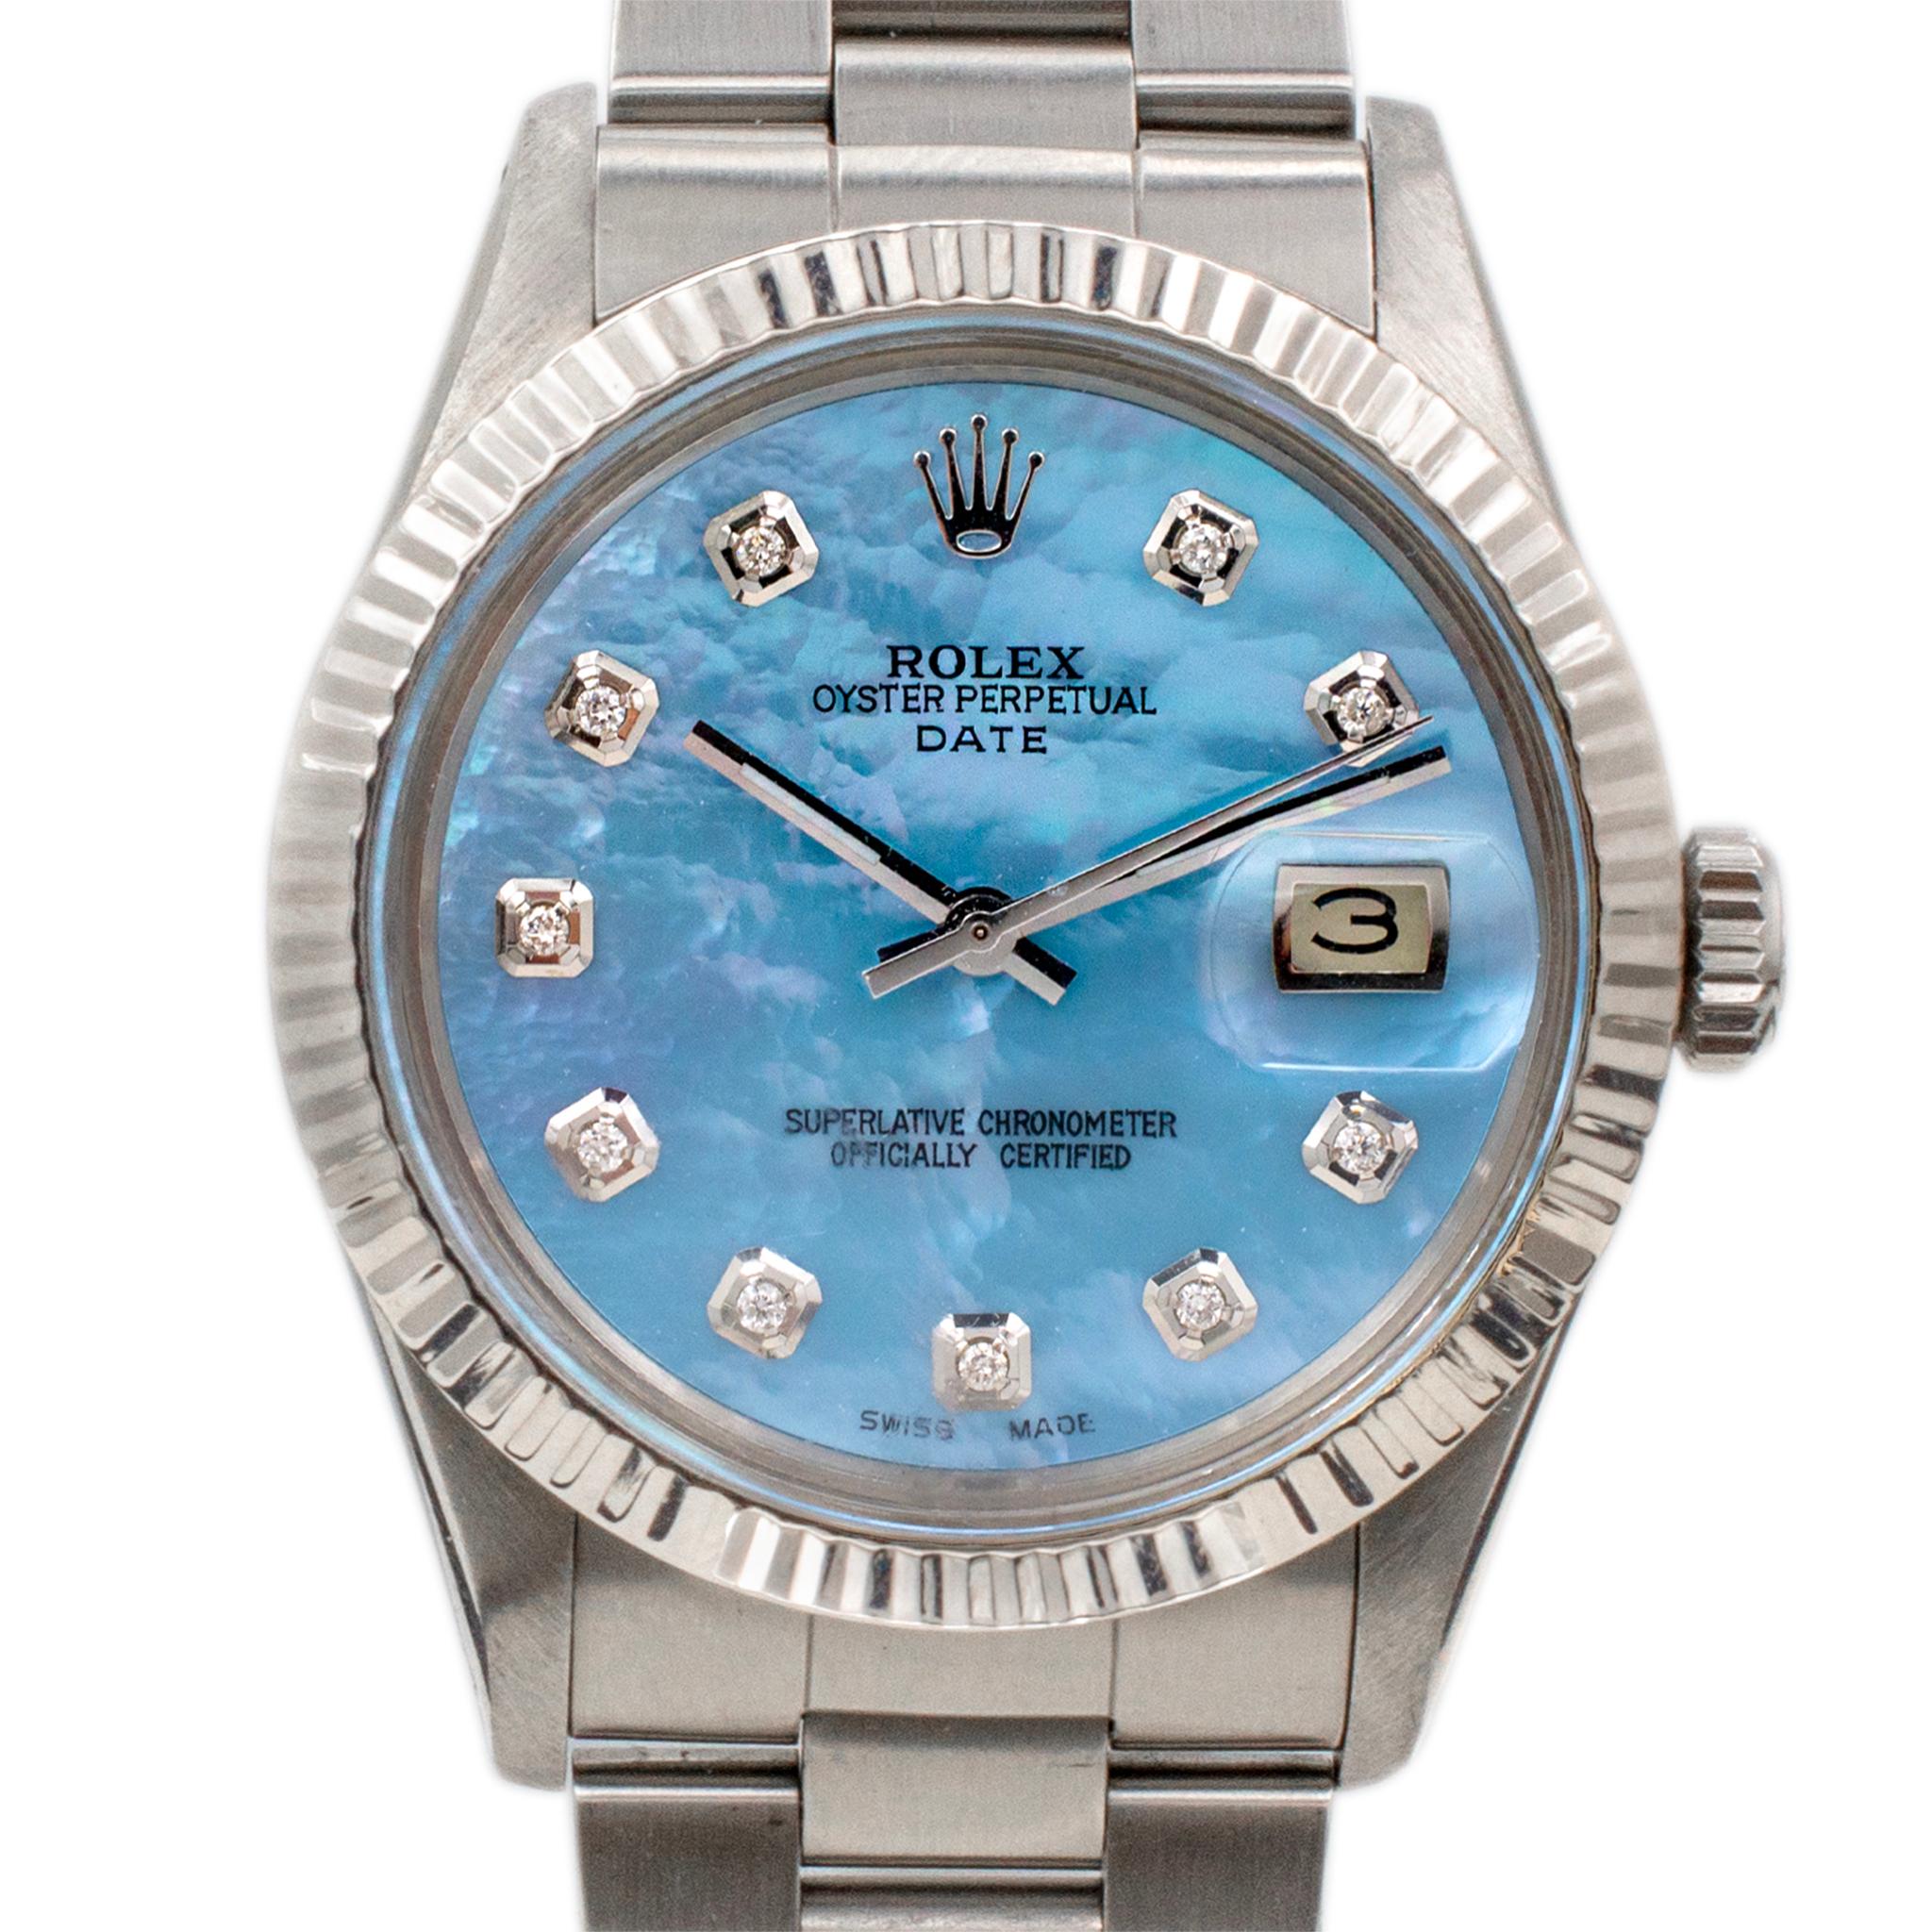 Brand: Rolex

Gender: Unisex

Metal Type: Stainless Steel

Diameter: 34.00 mm

Weight: 90.40 Grams

Stainless steel diamond ROLEX Swiss made watch. The metal was tested and determined to be stainless steel. The 